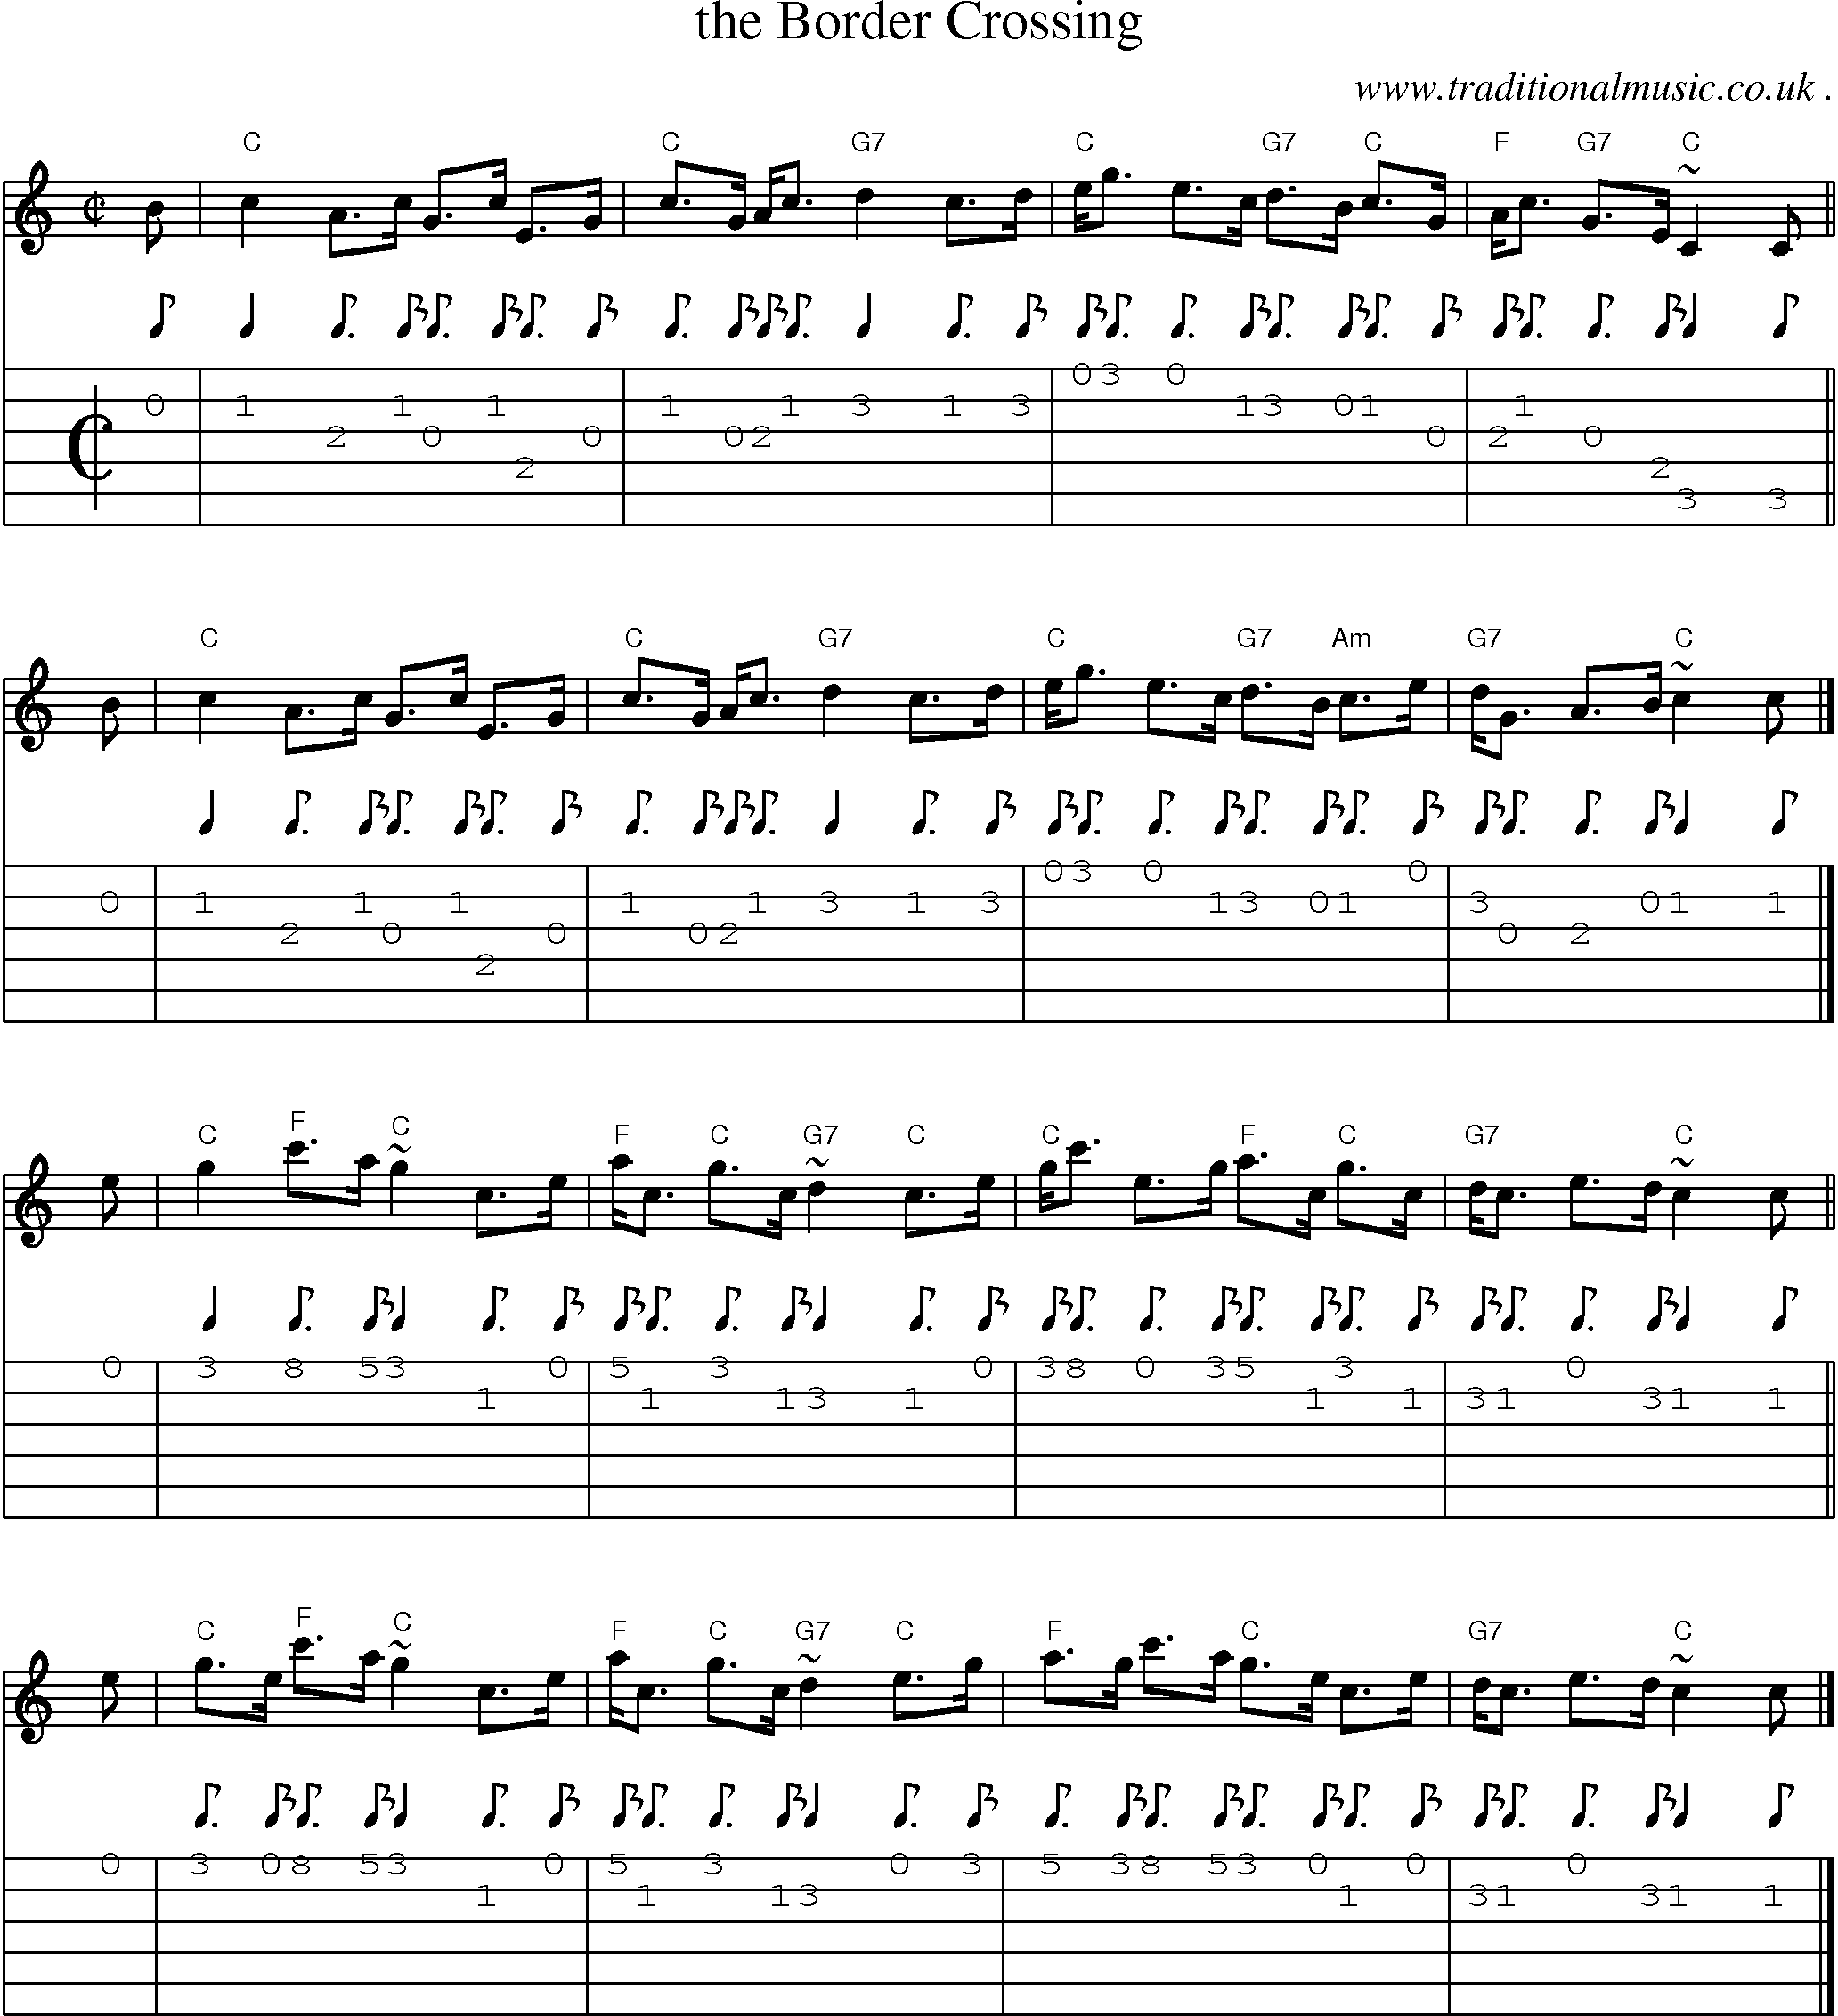 Sheet-music  score, Chords and Guitar Tabs for The Border Crossing